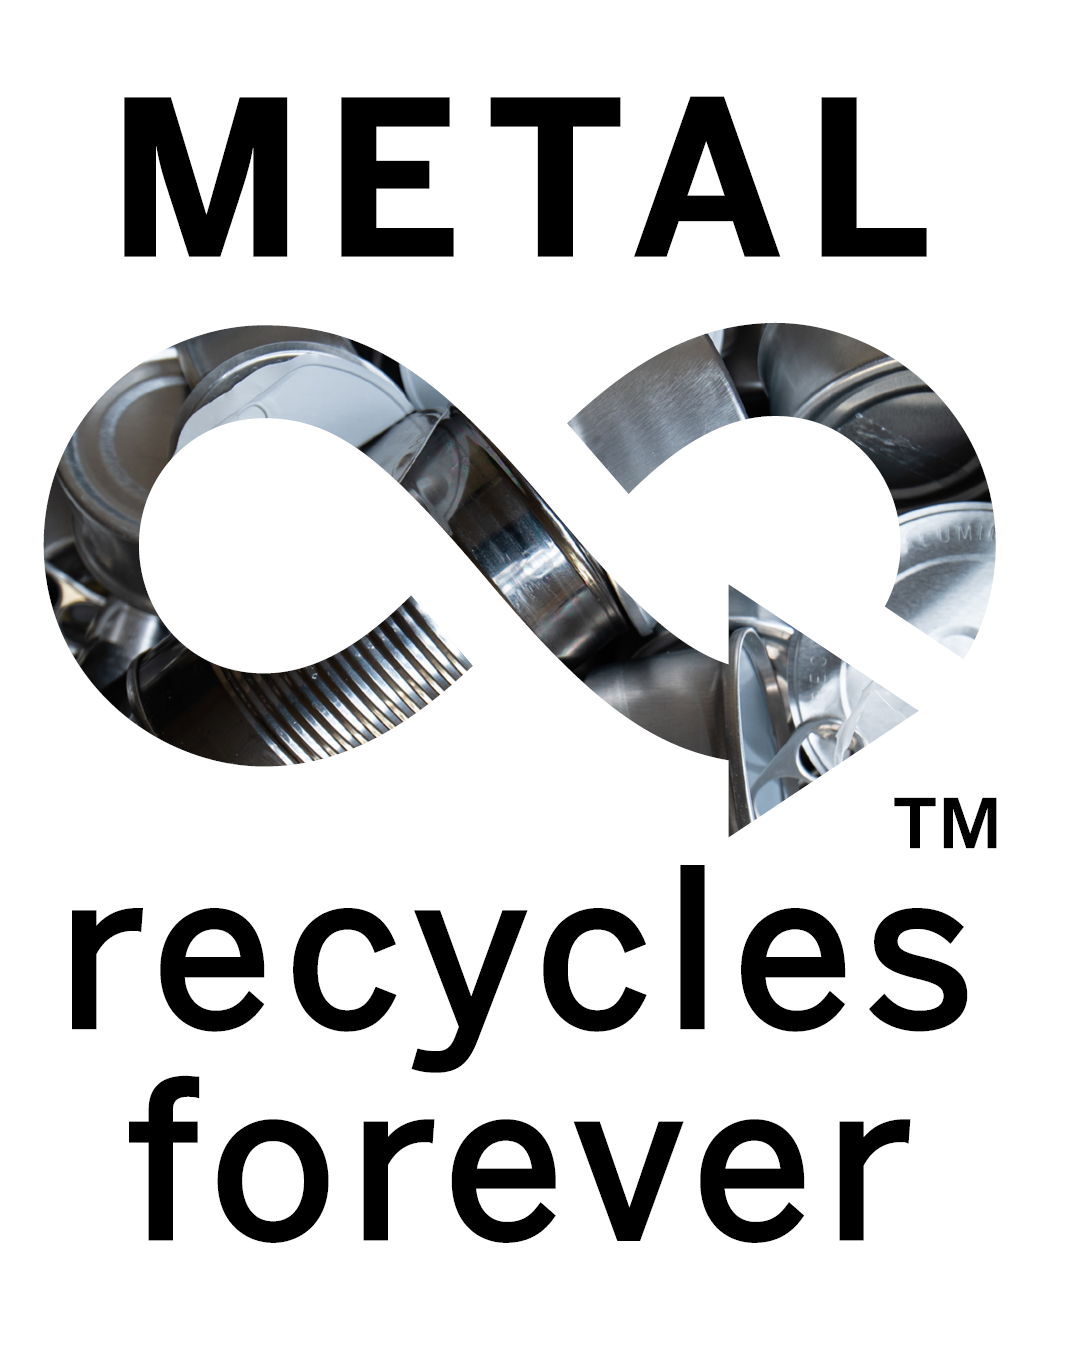 Metal recycles forever logo.